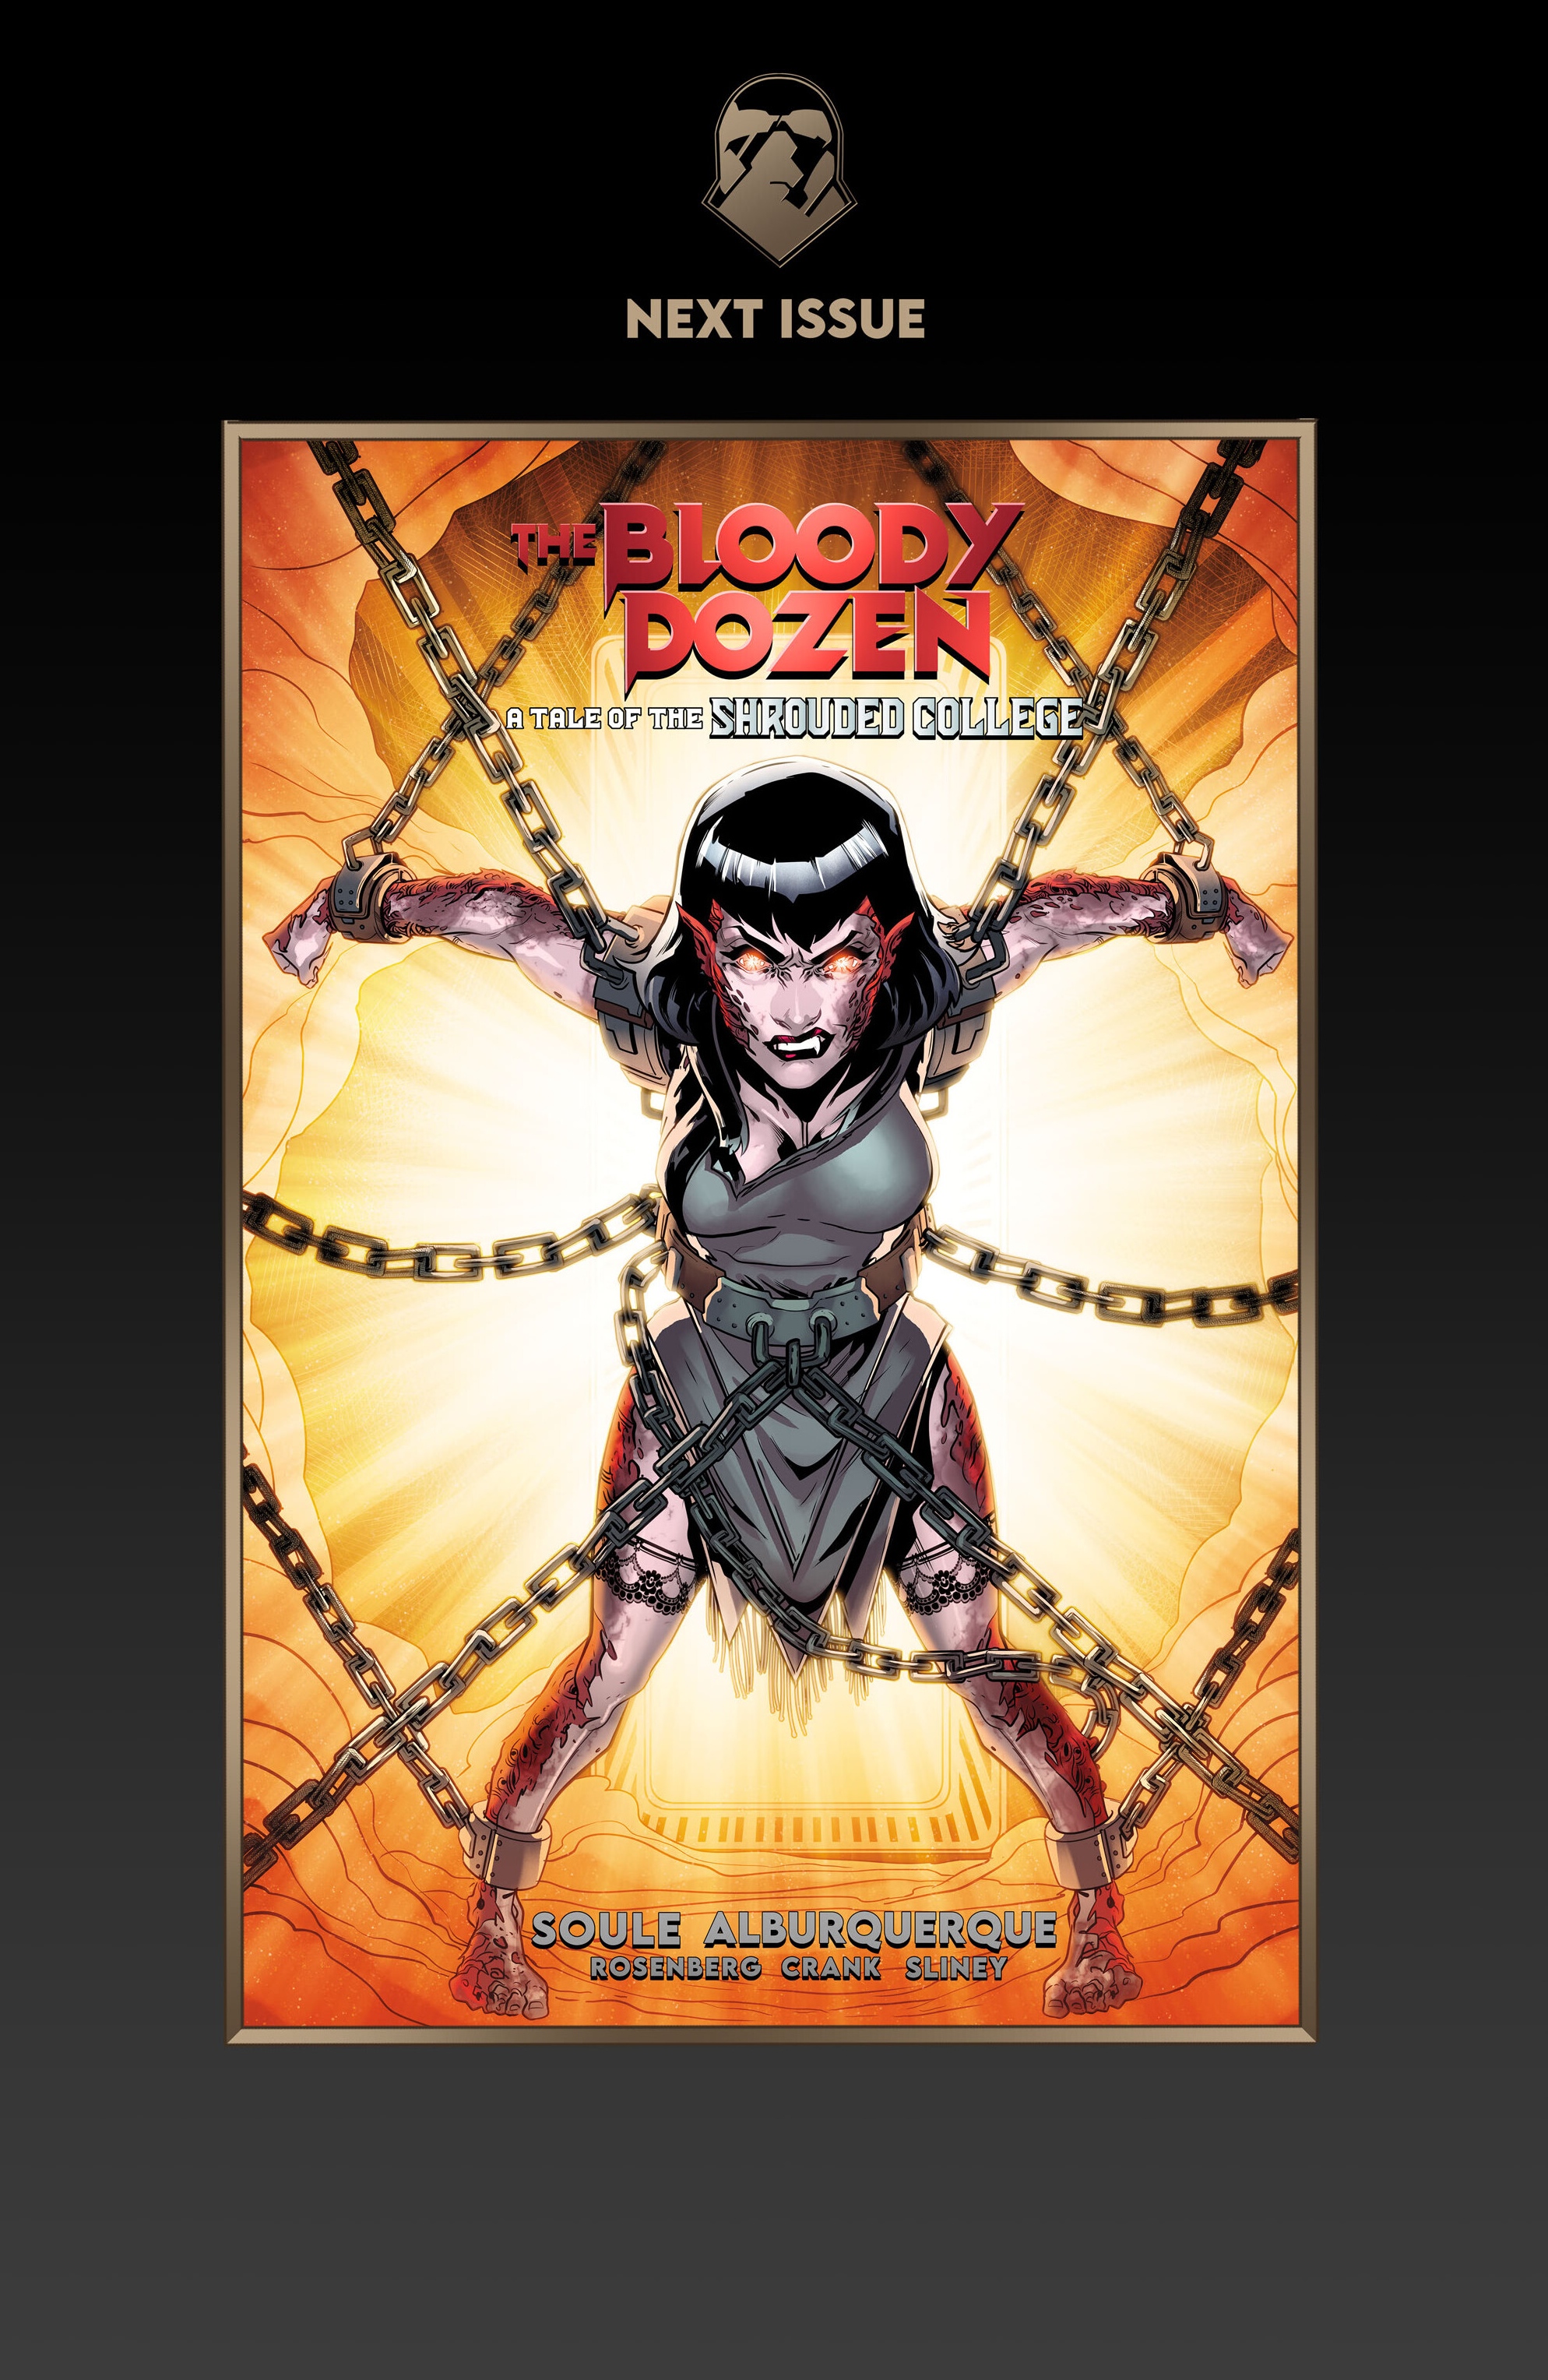 Read online The Bloody Dozen: A Tale of the Shrouded College comic -  Issue #2 - 34